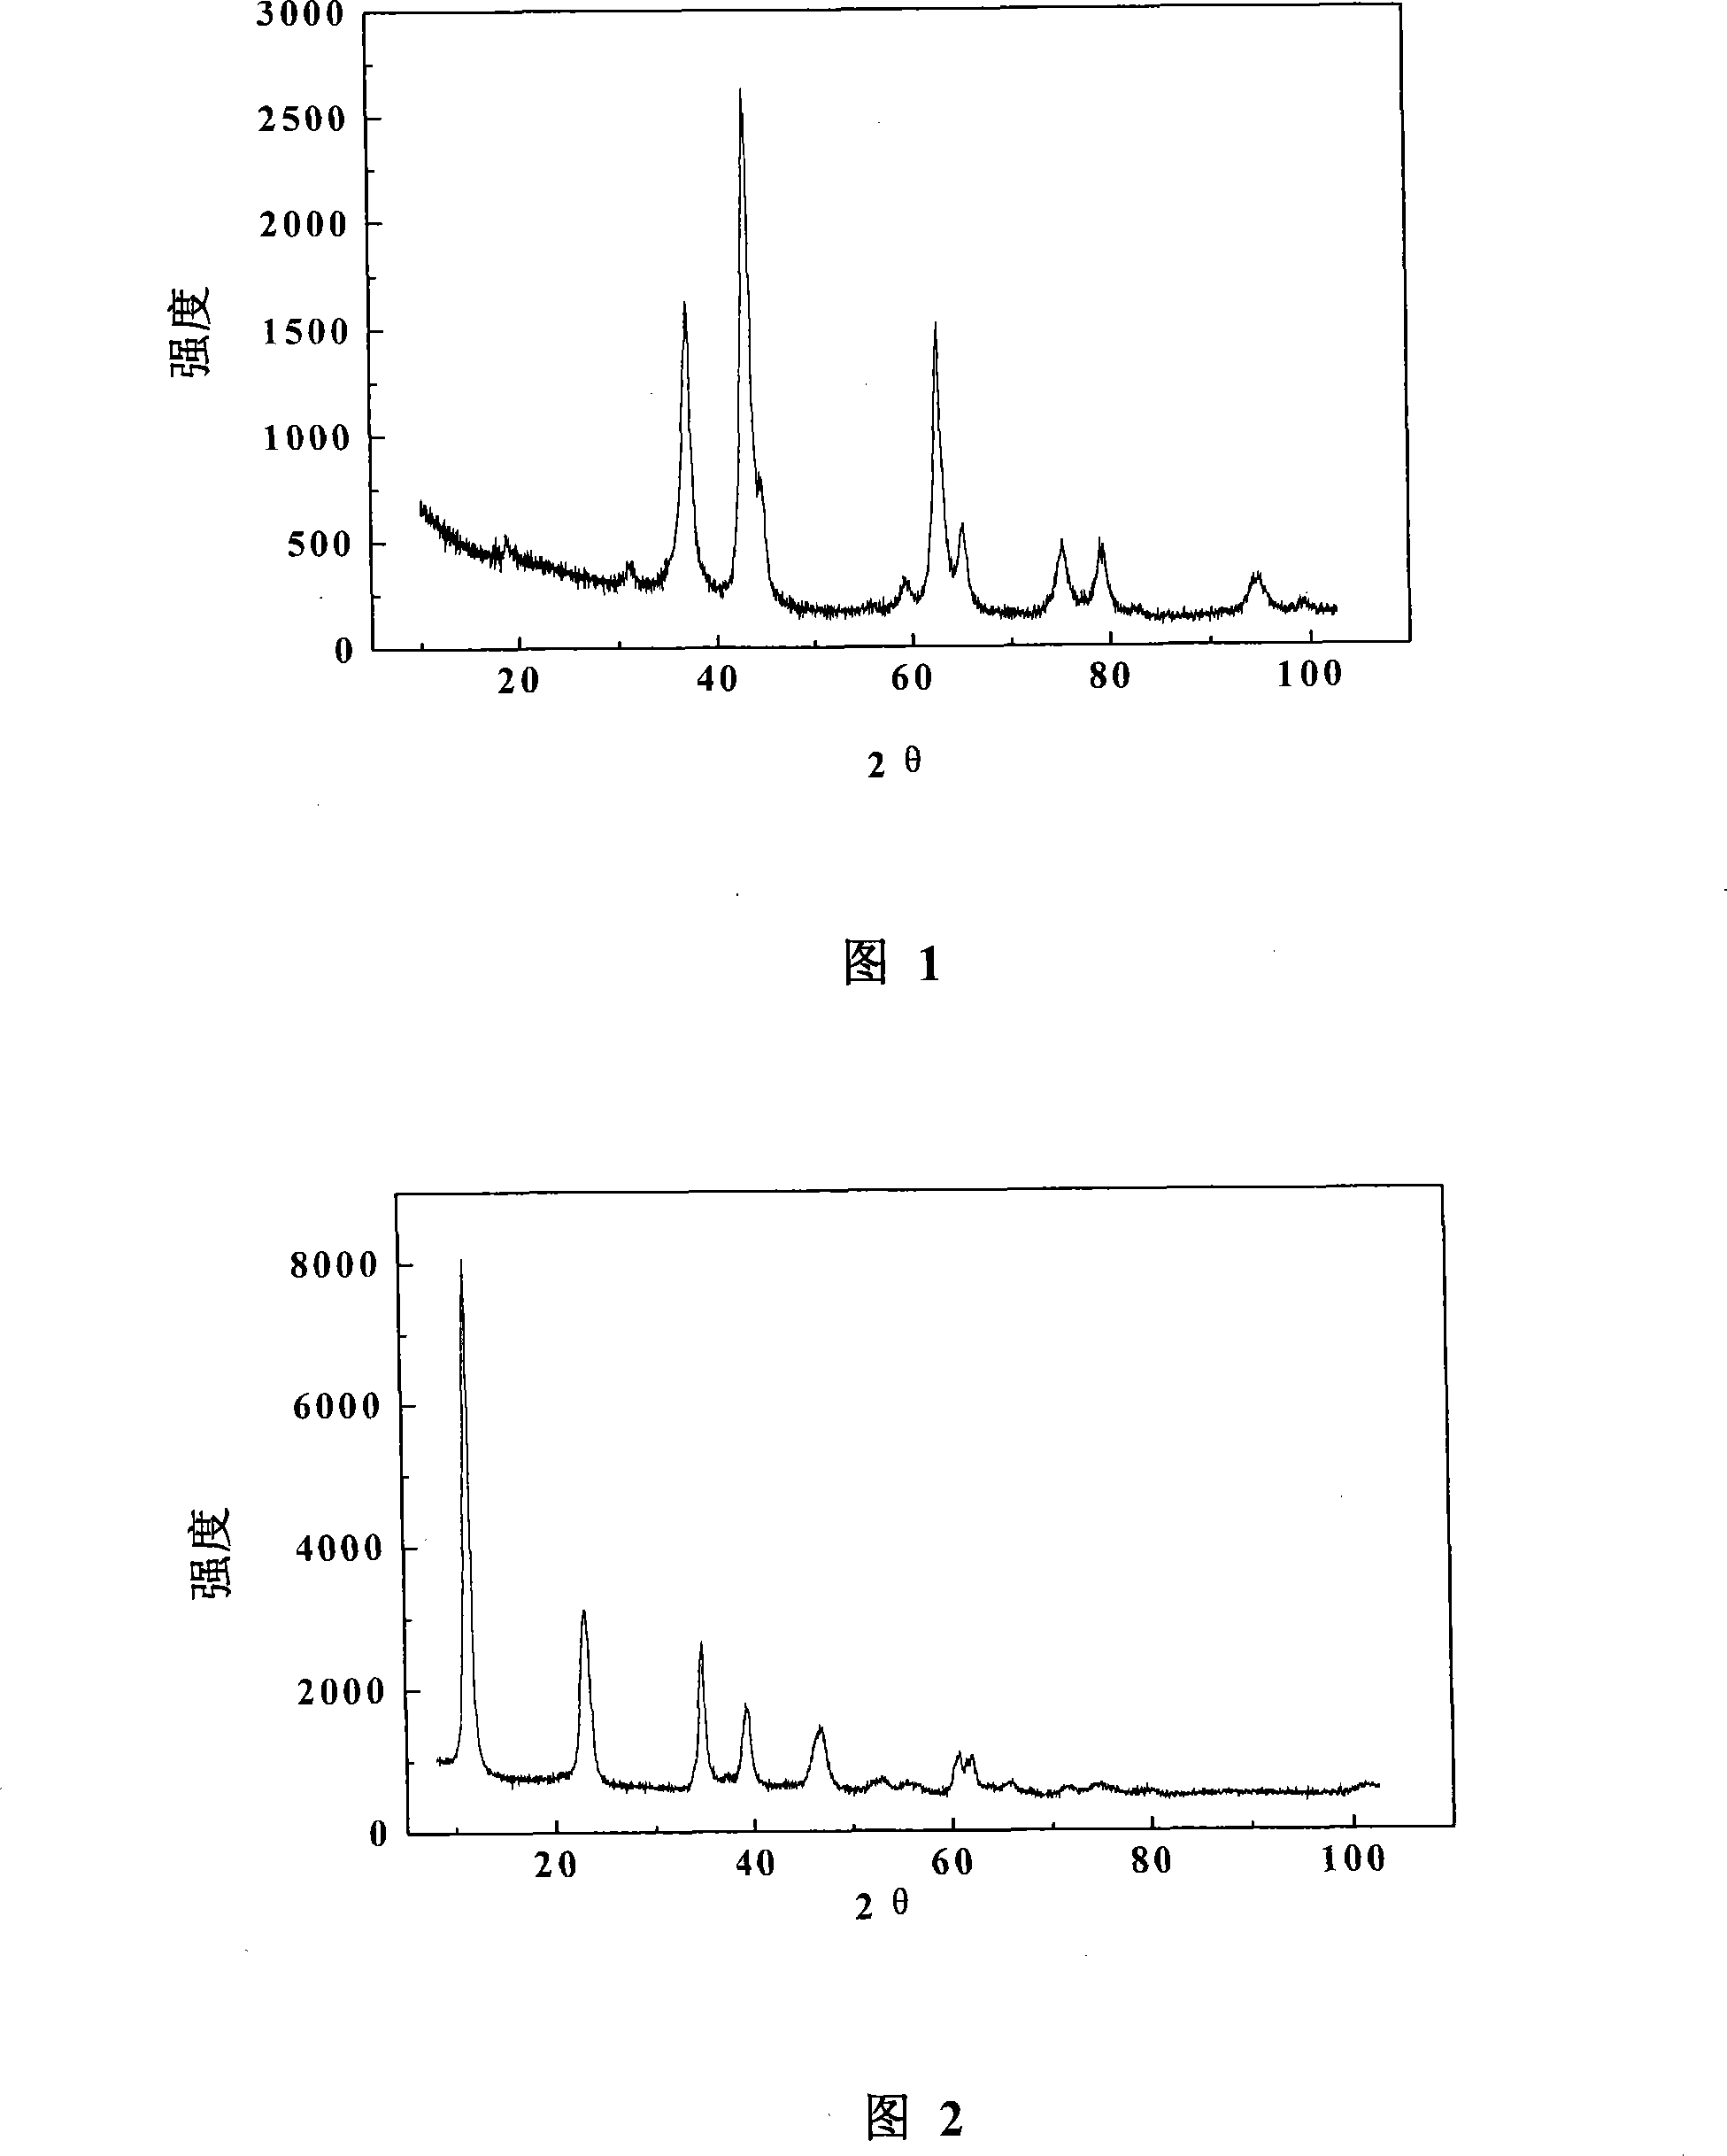 Hydrotalcite type hydrocracking catalyst and method for preparing same